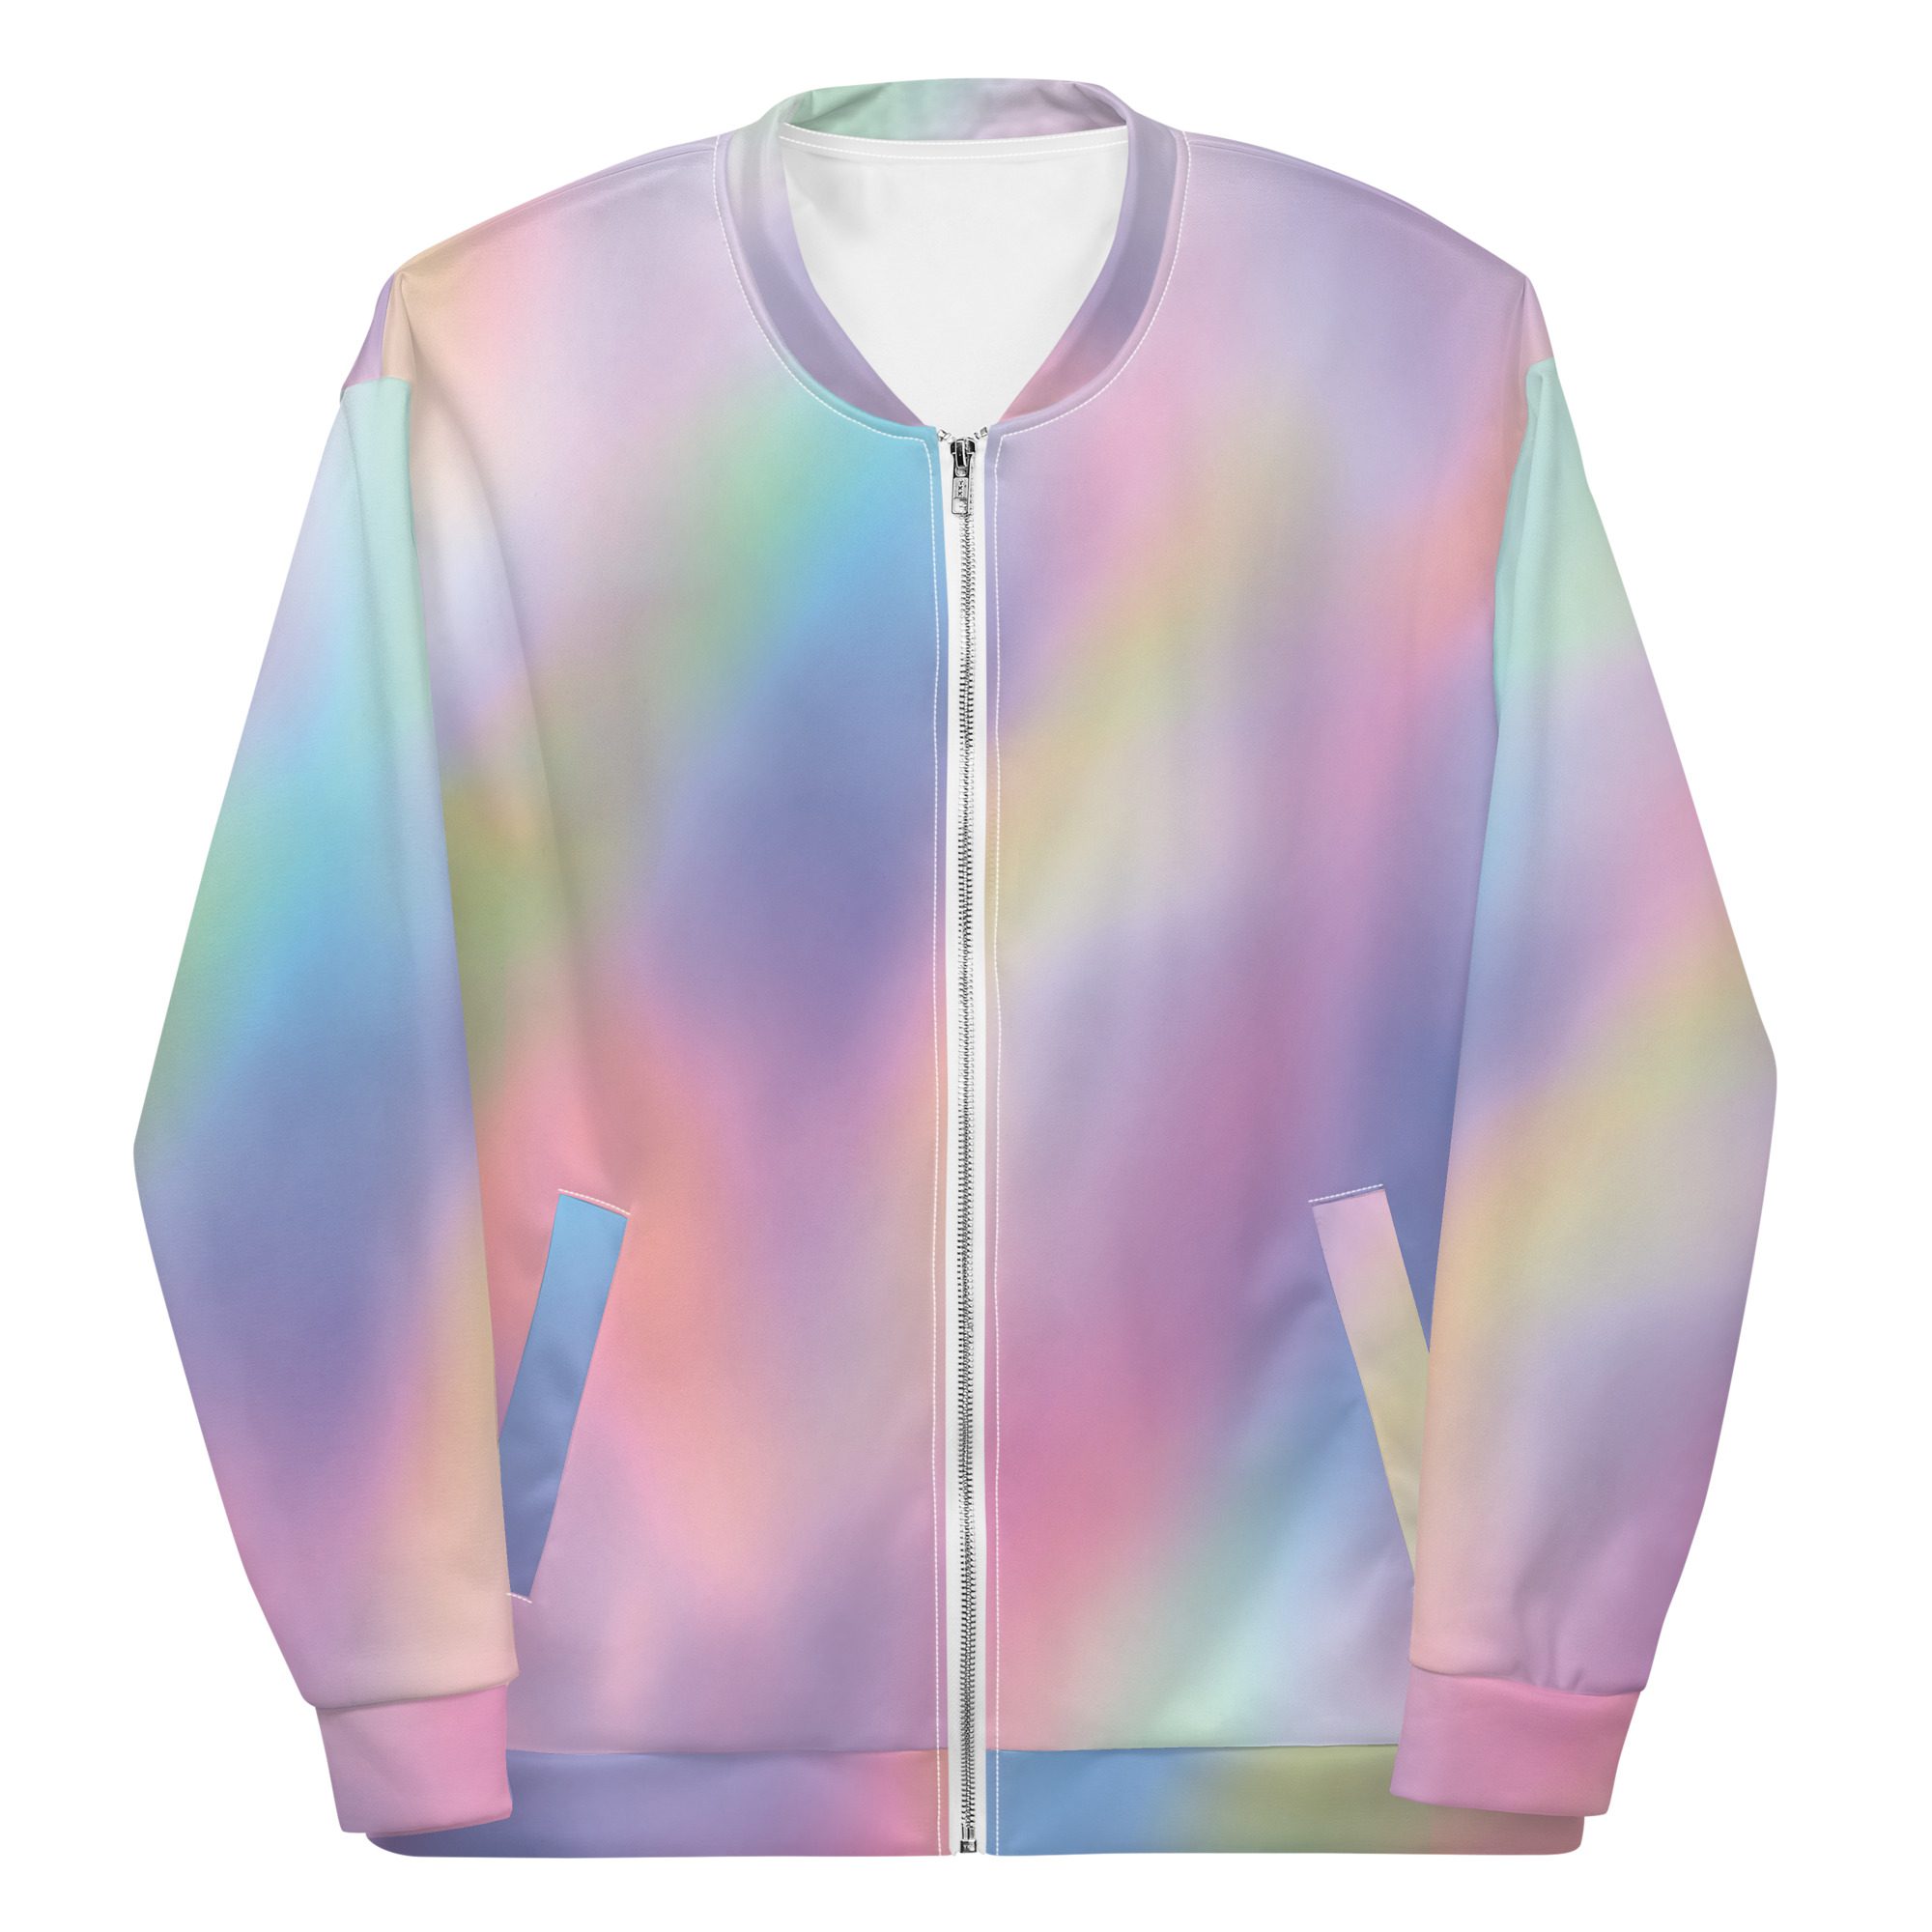 I’m Not Your Neurotypical Girl Bomber Jacket